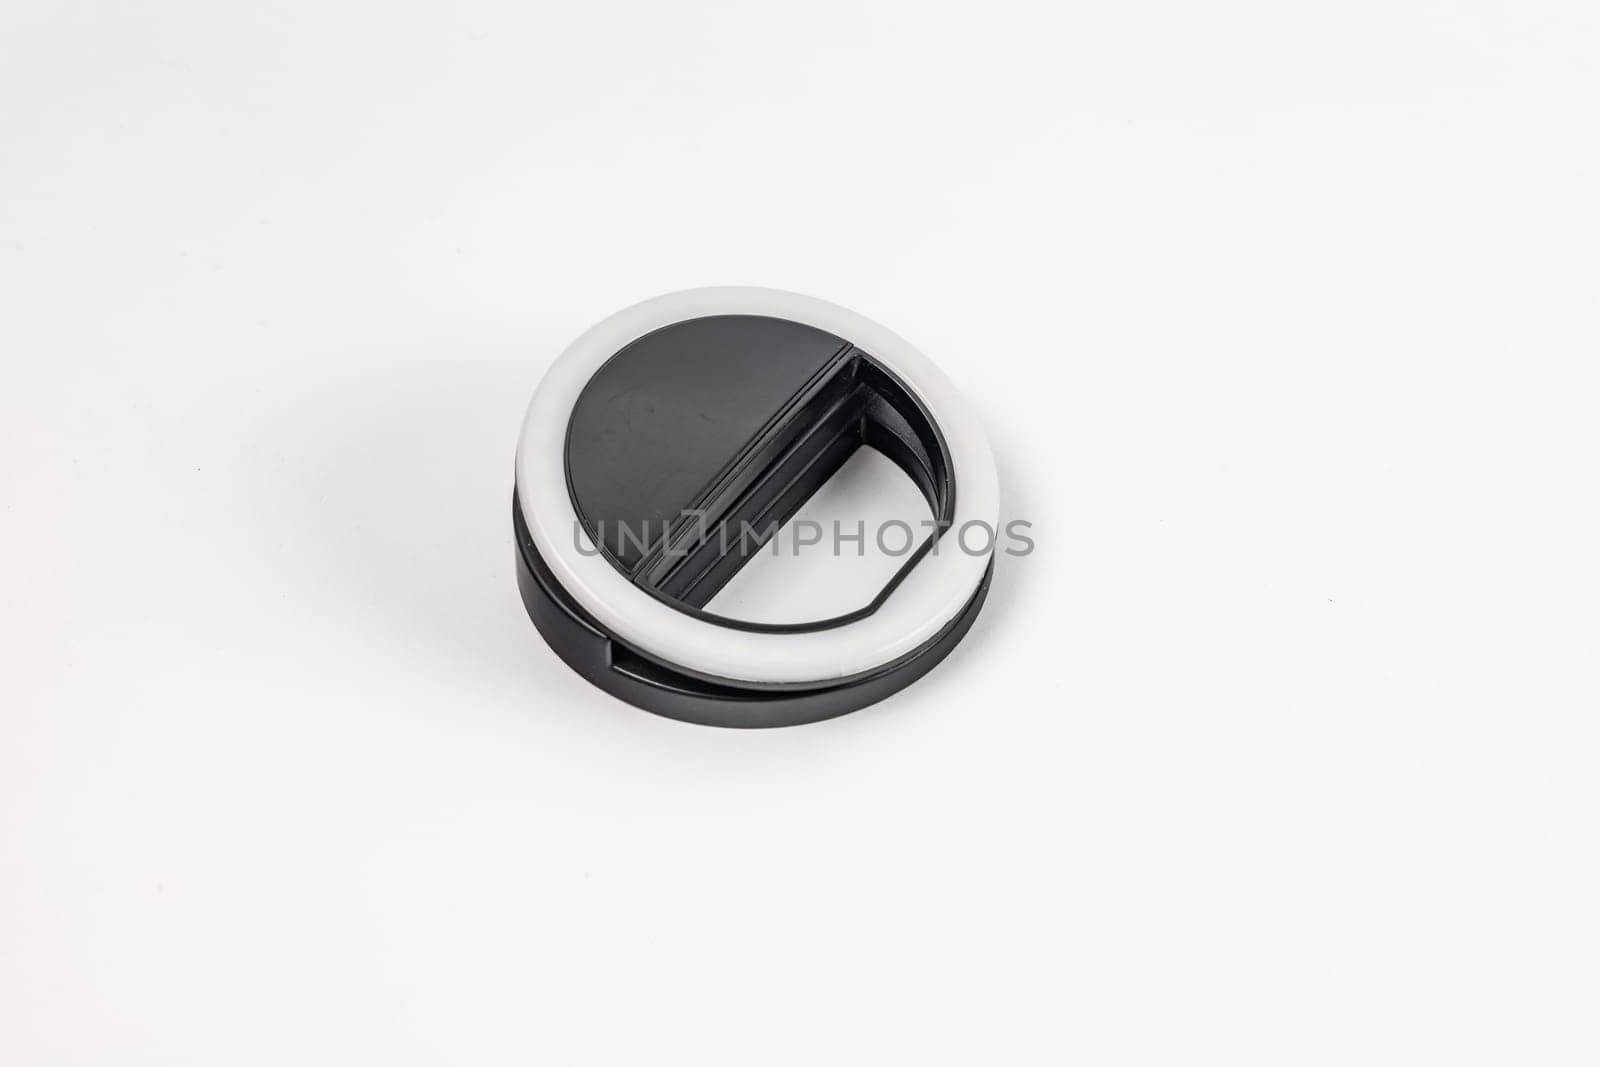 Small and portable LED ring light to attach on phone camera by Wierzchu